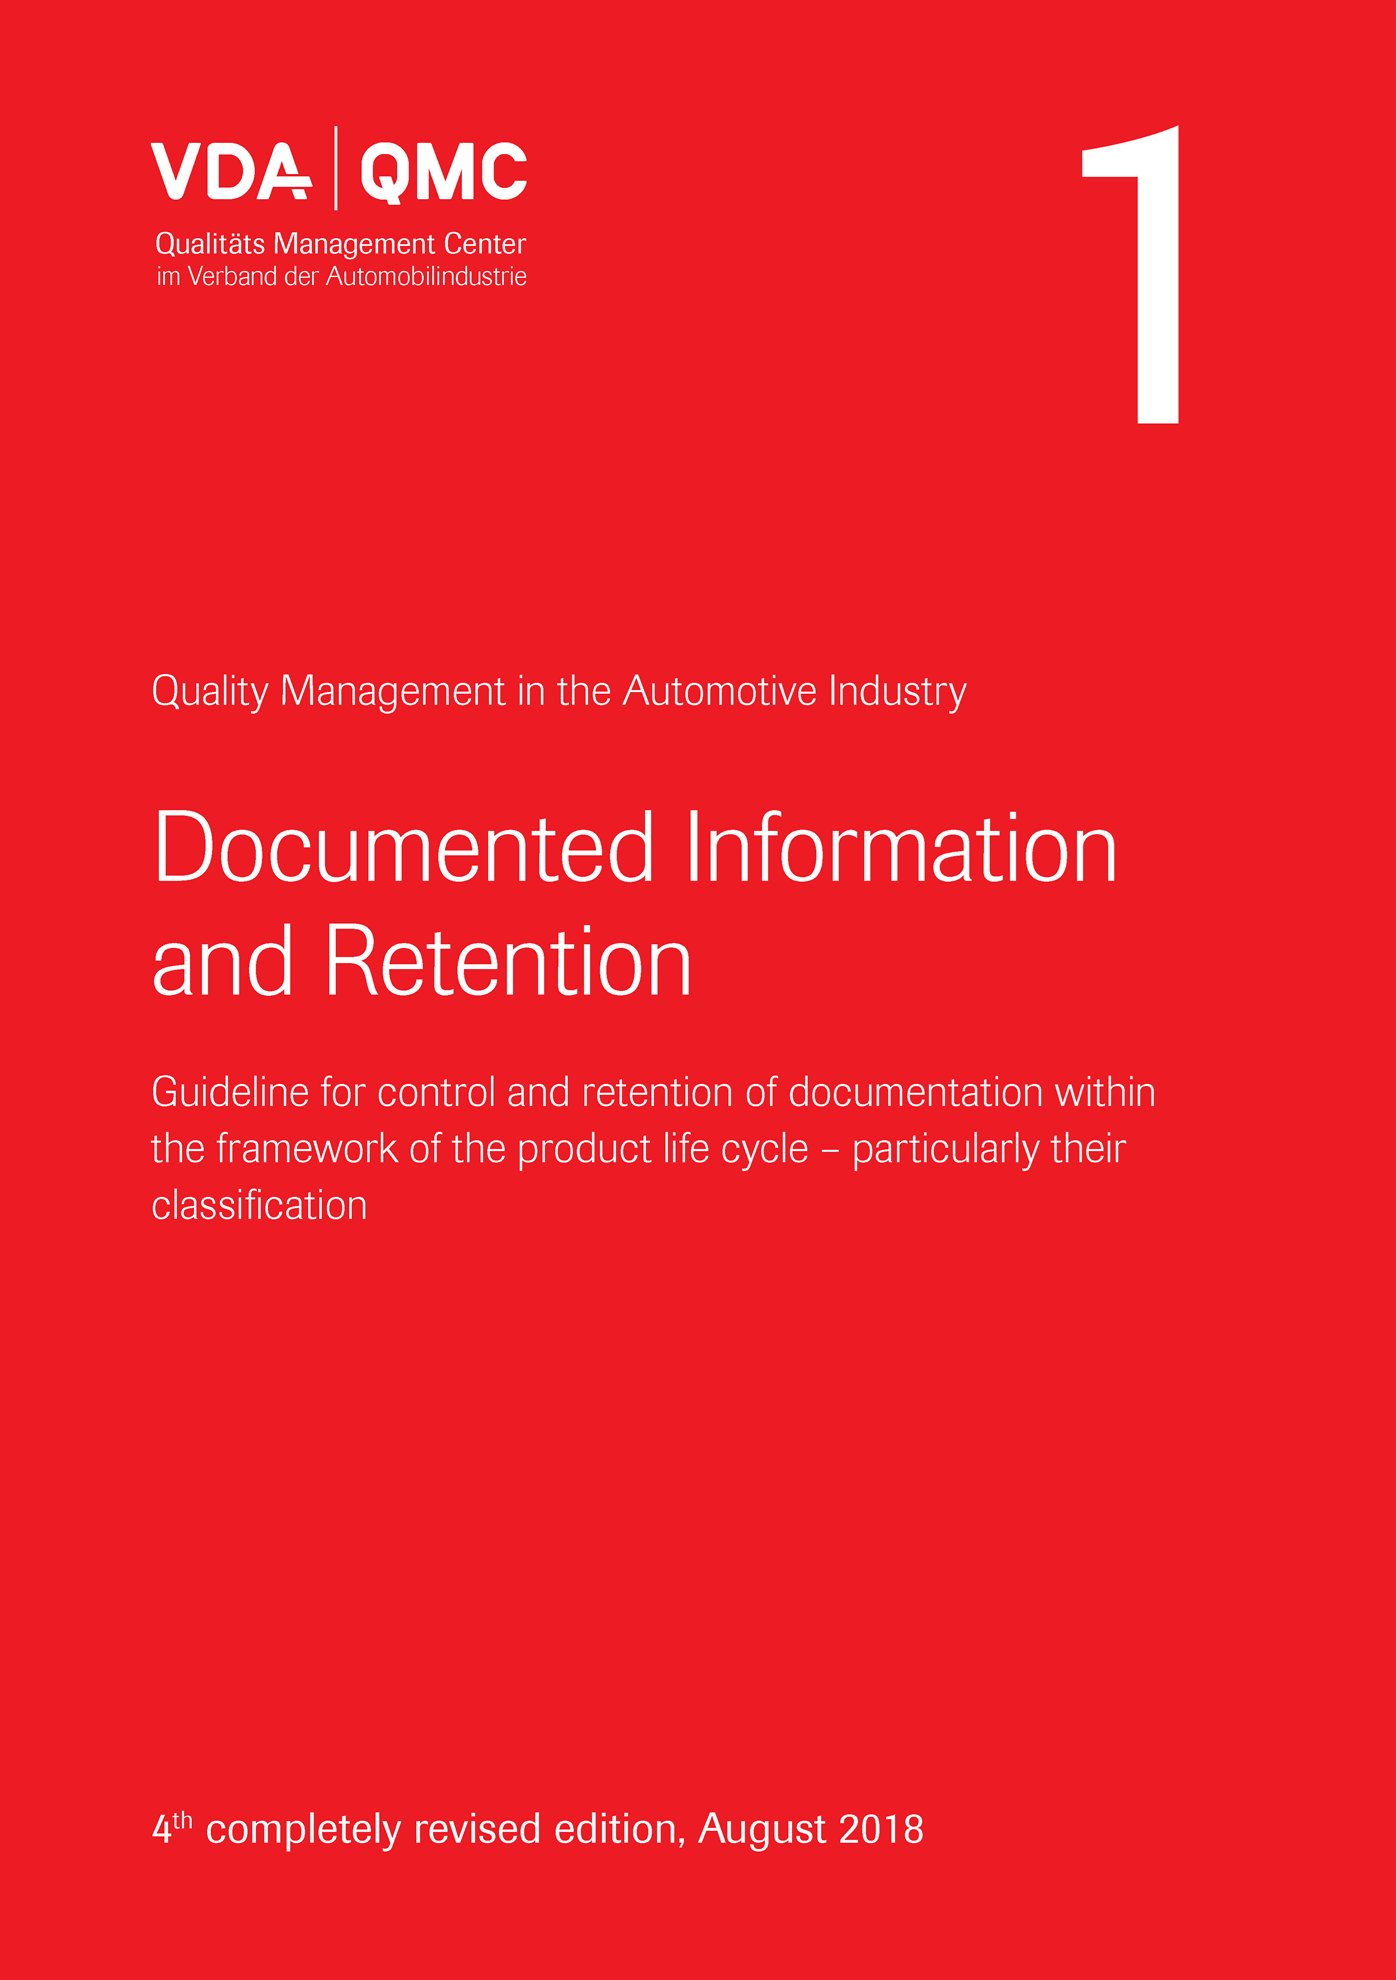 Náhľad  VDA Volume 1 - Documented Information and Retention, 4th completely revised edition, August 2018 1.8.2018